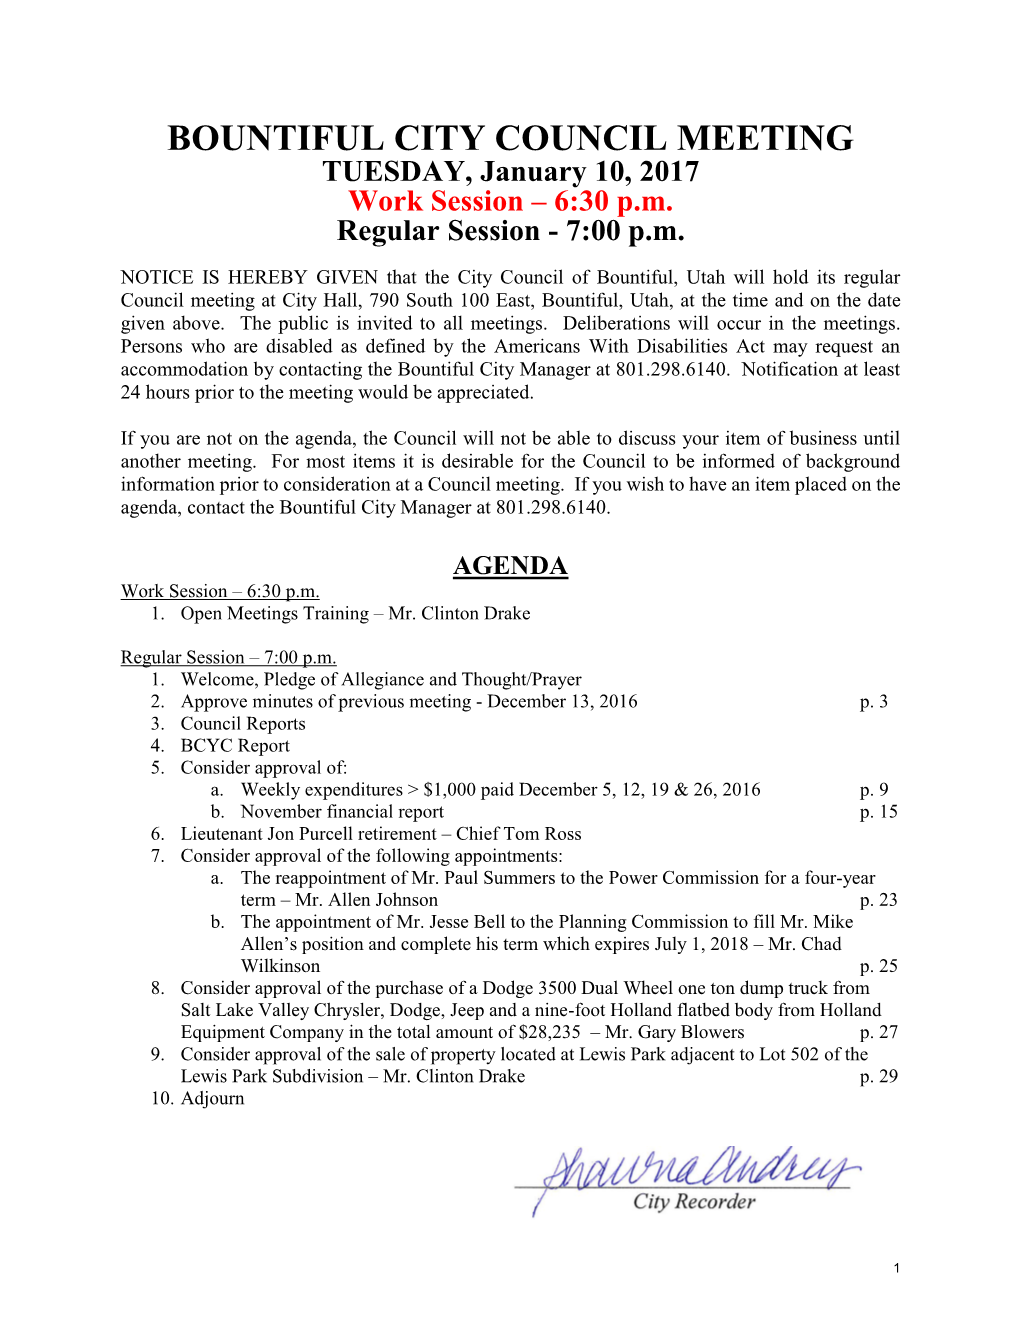 BOUNTIFUL CITY COUNCIL MEETING TUESDAY, January 10, 2017 Work Session – 6:30 P.M